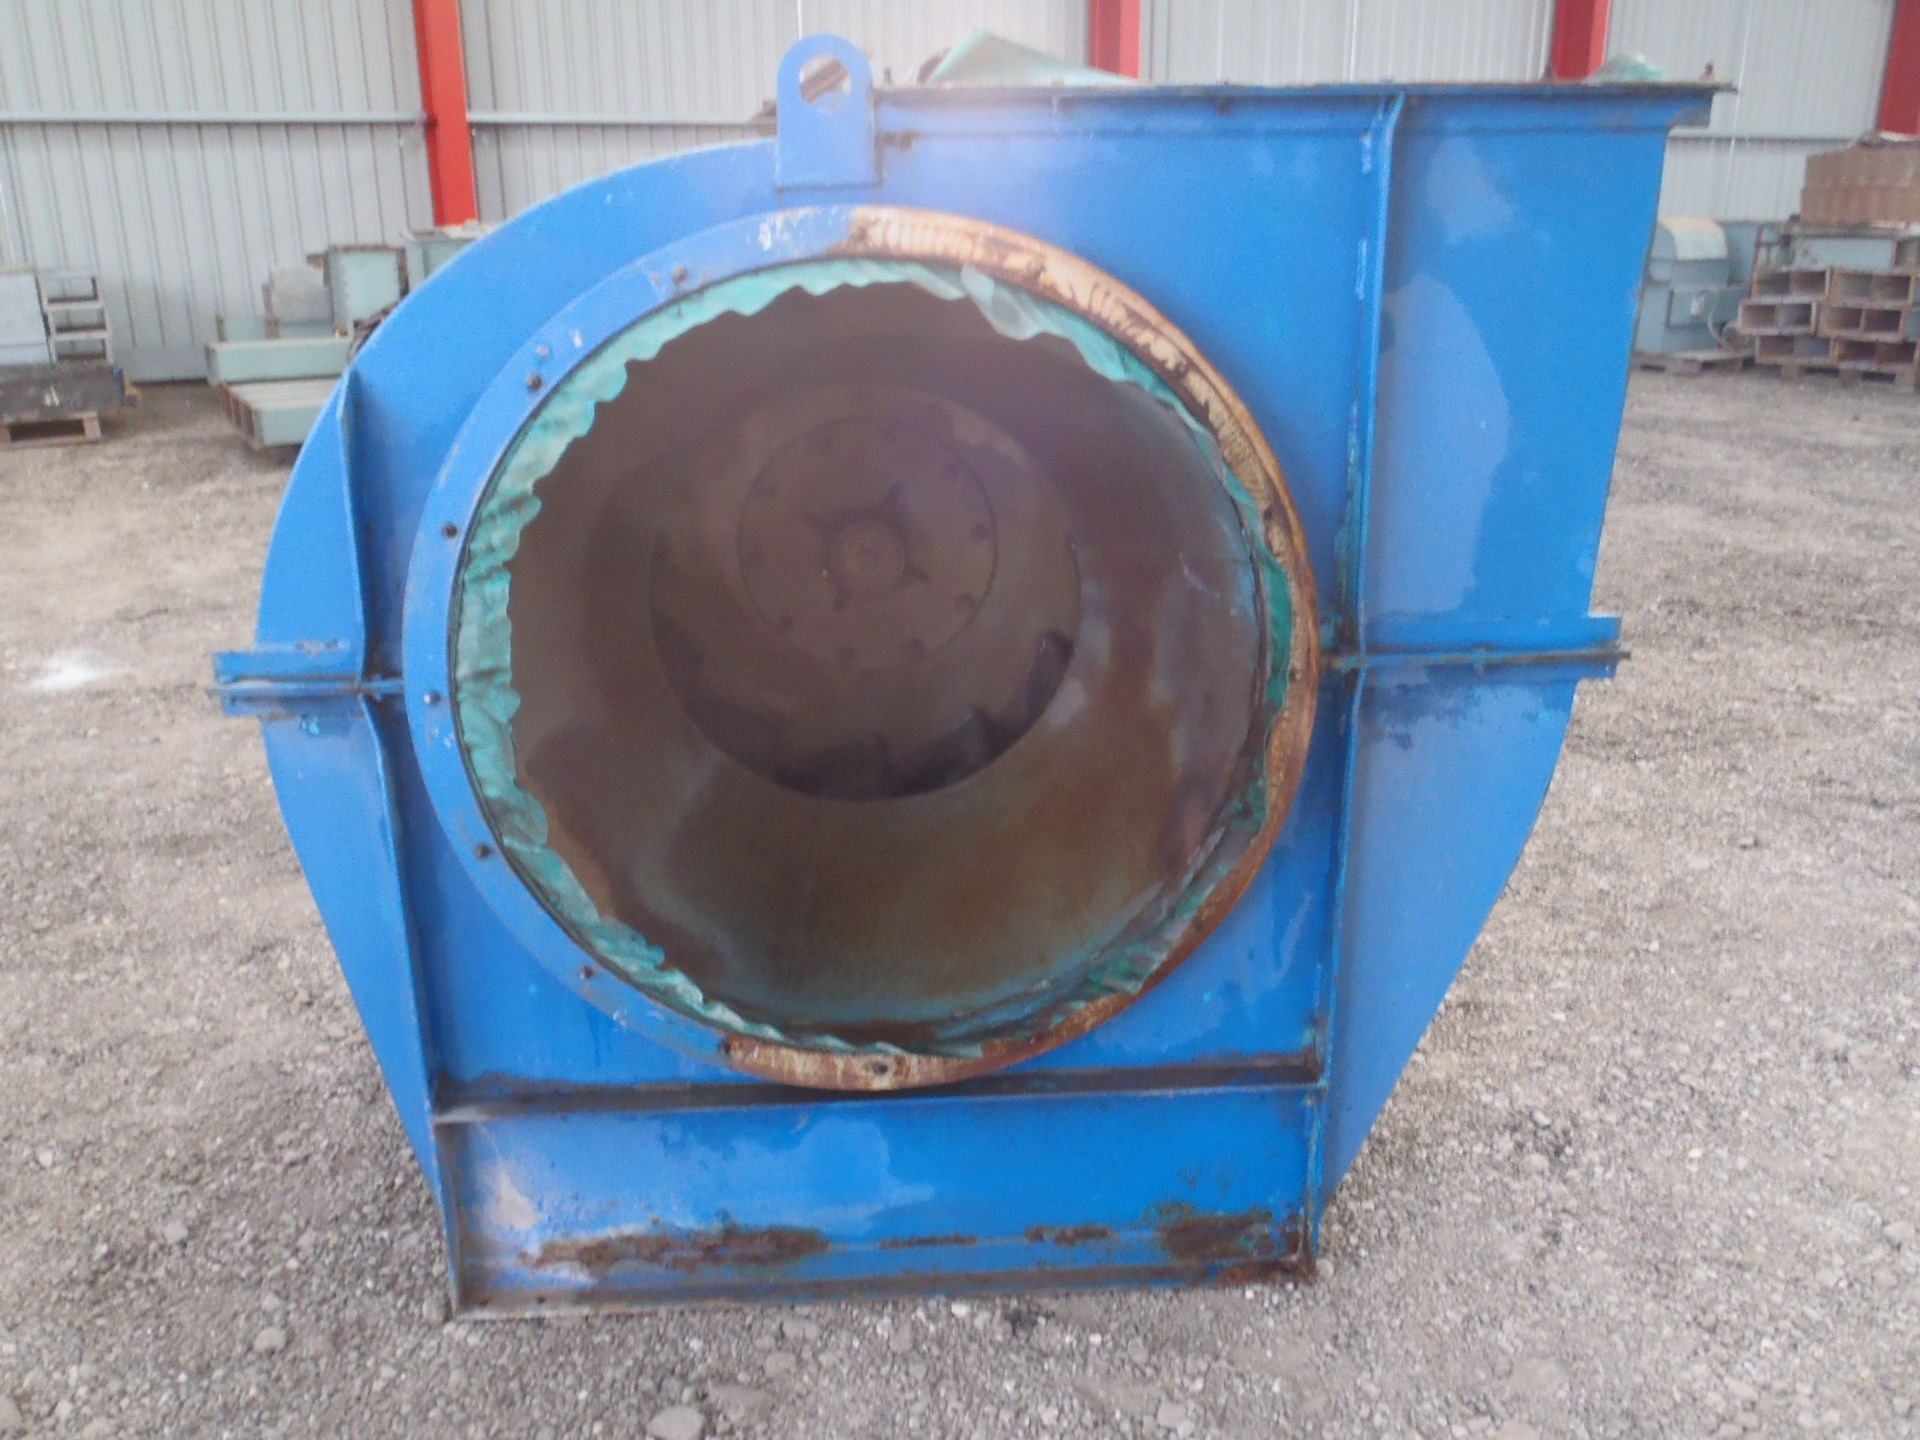 Centrifugal Fan, 55kW, three phase, approx. 900mm - Image 5 of 6